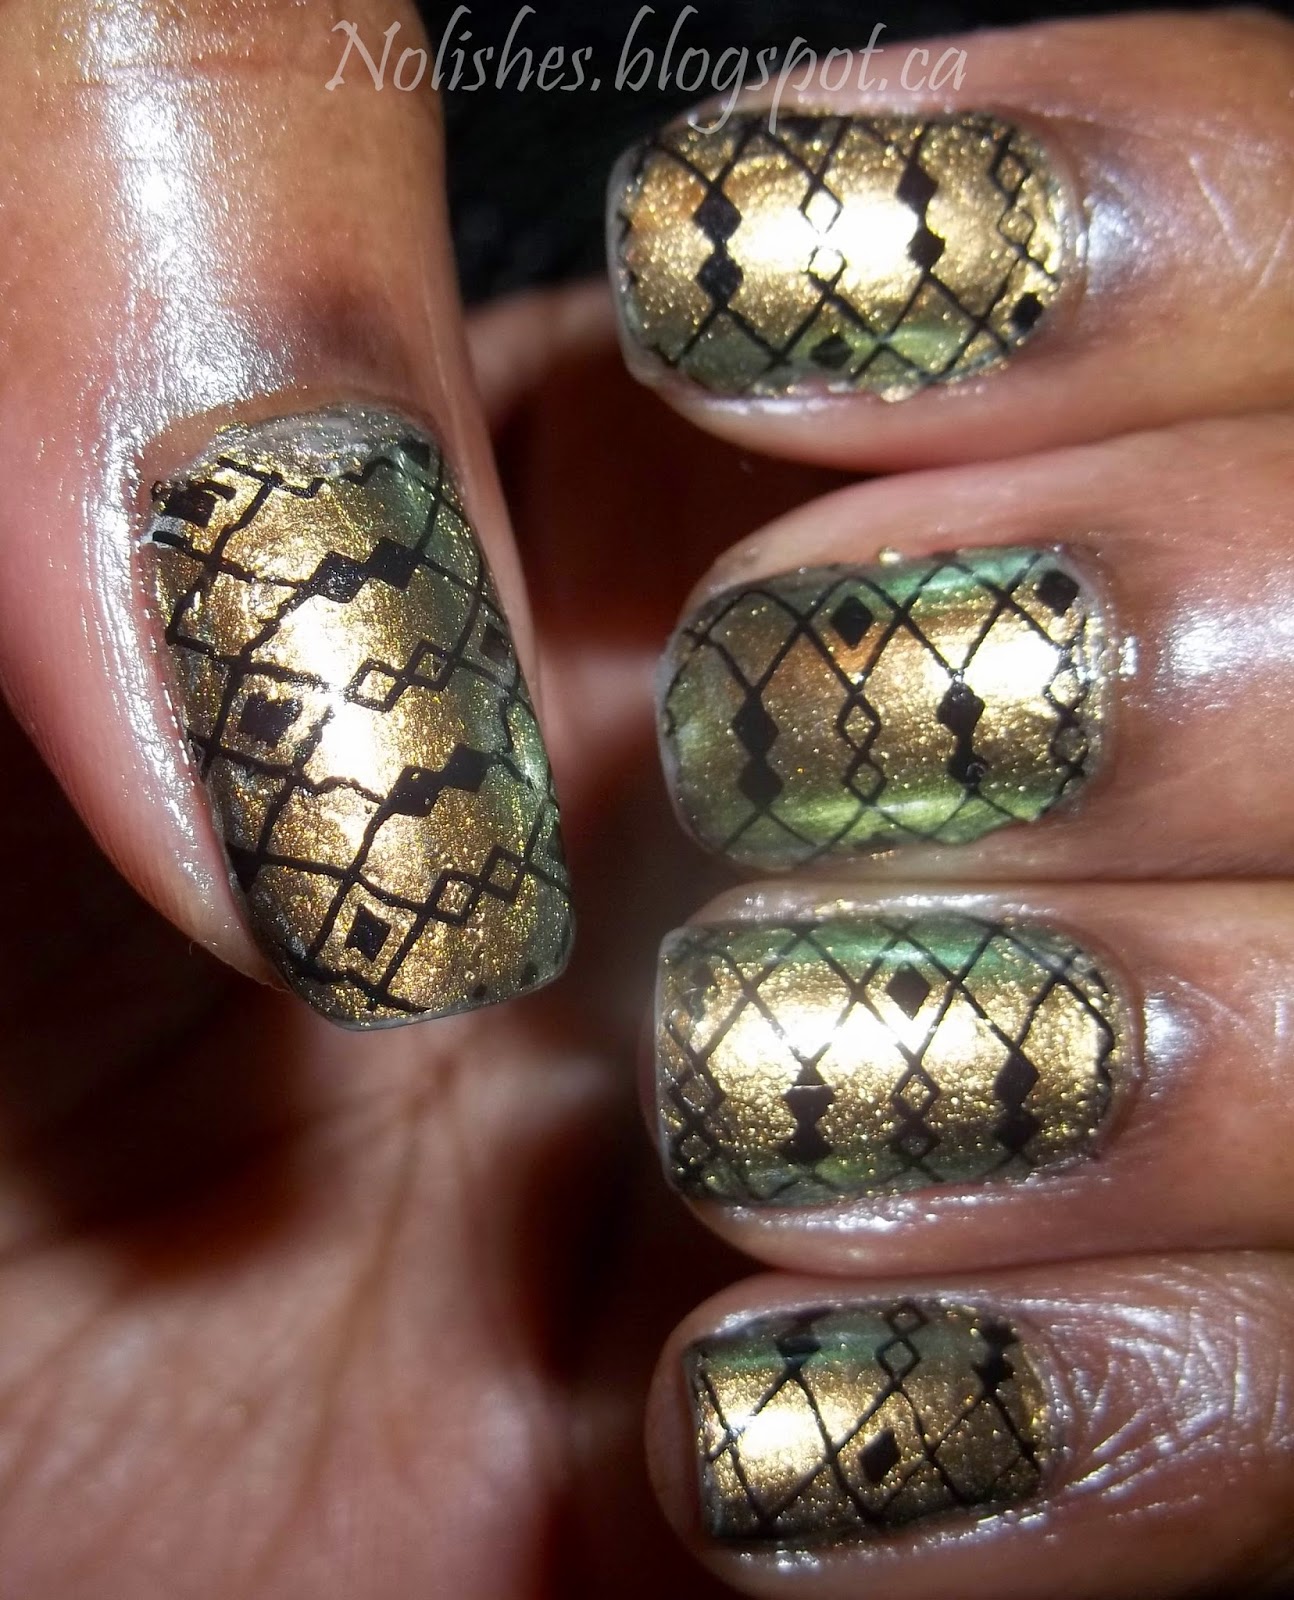 nail stamping manicure using OPI 'Just Spotted the Lizard' a bronze and green duochrome nail polish as the base colour, and stamped with a diamond and line print in black